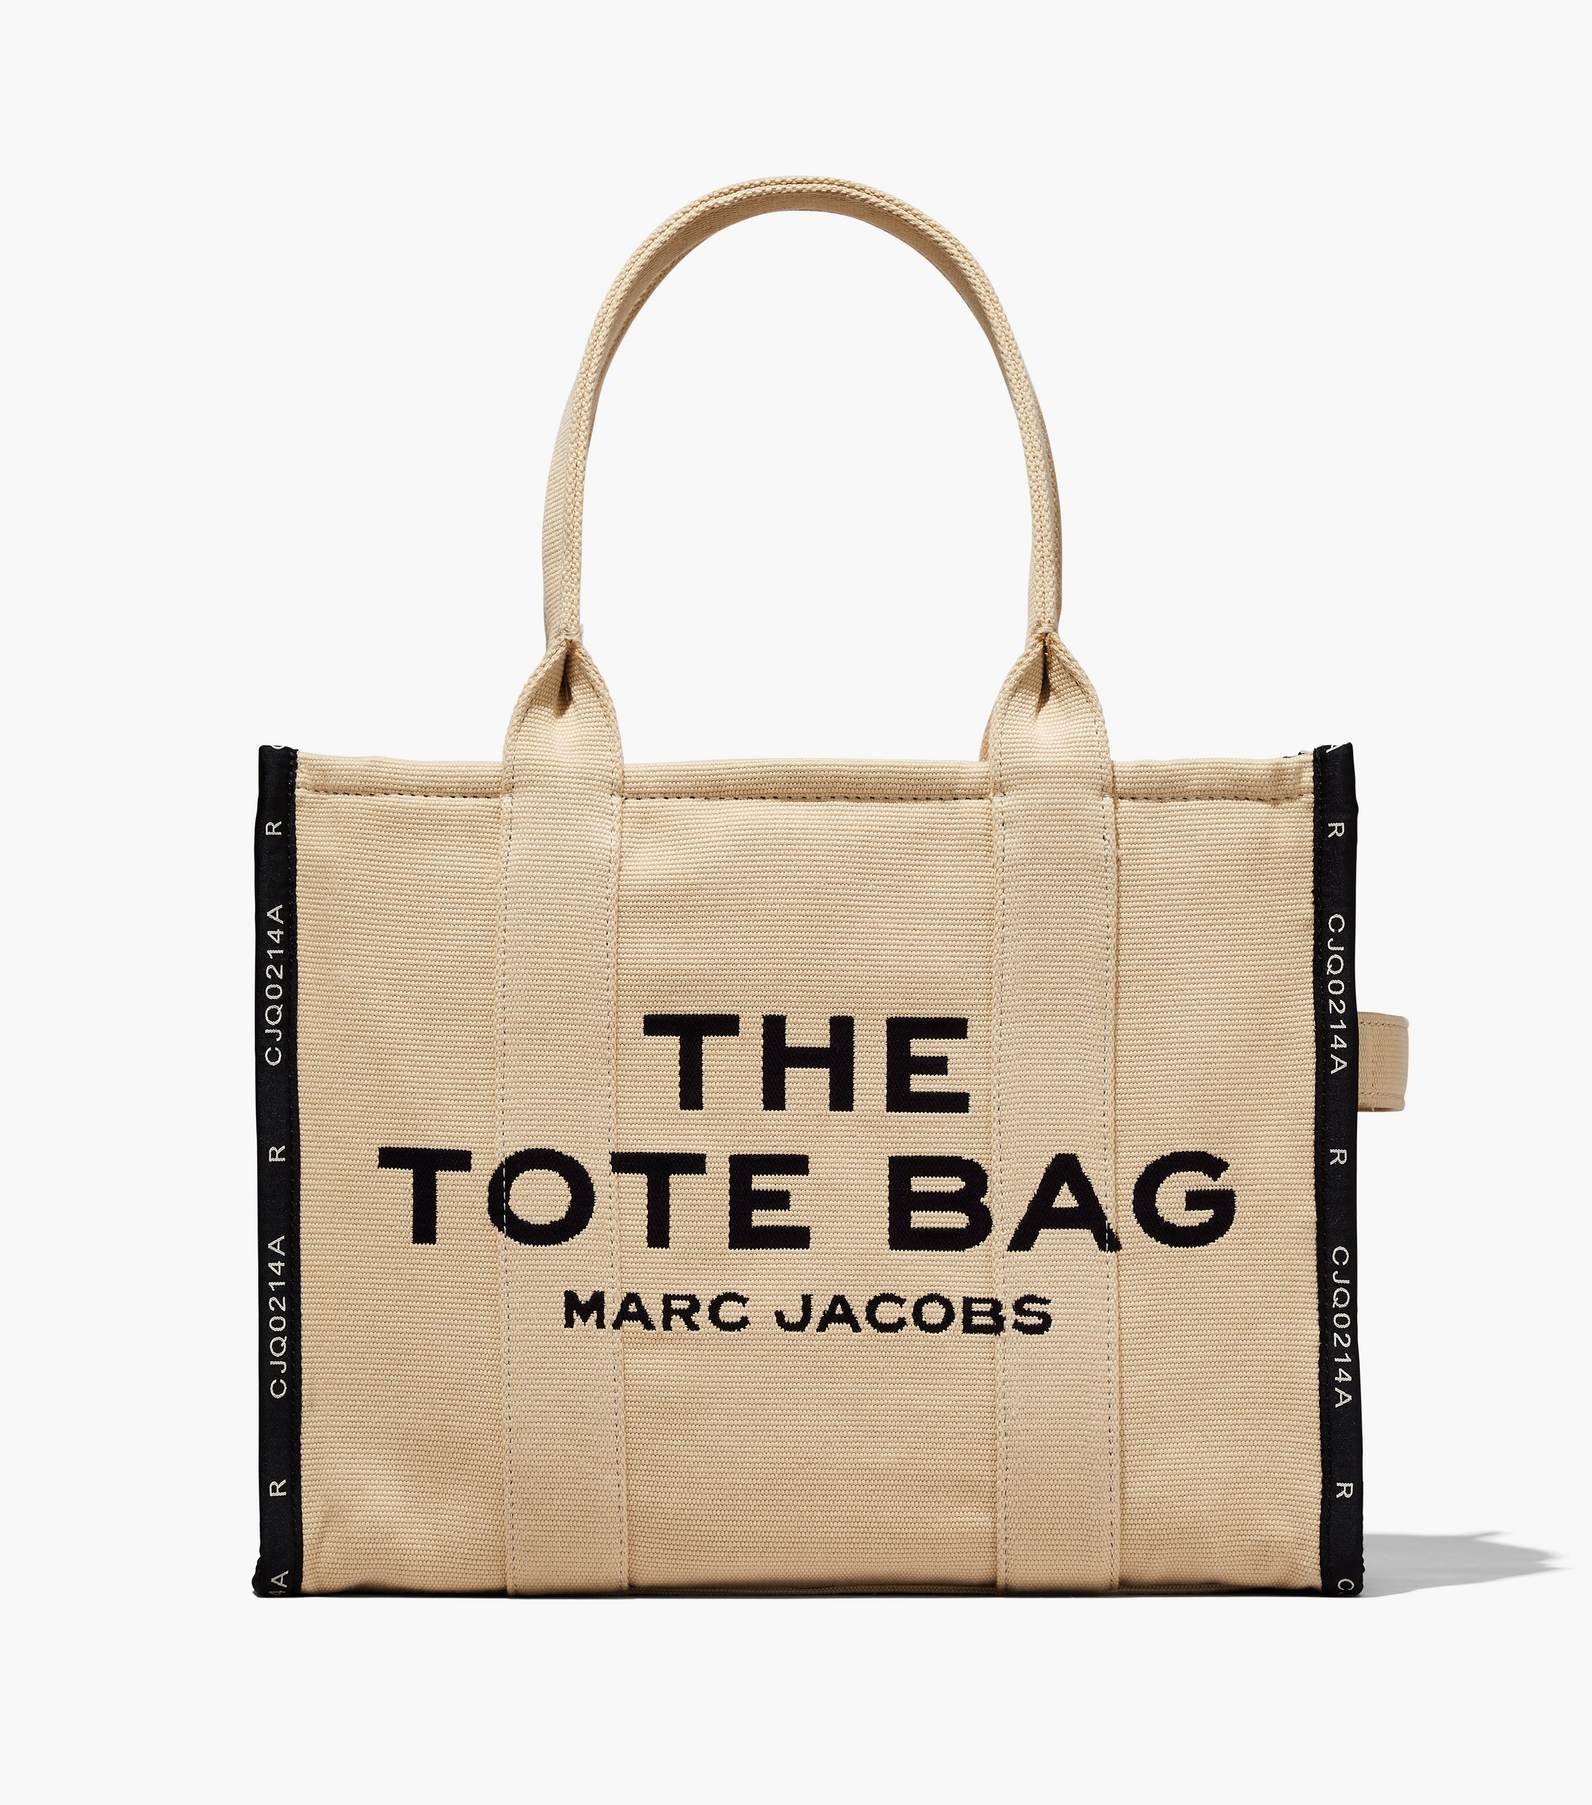 I tested July's often sold out travel tote and it lives up to the